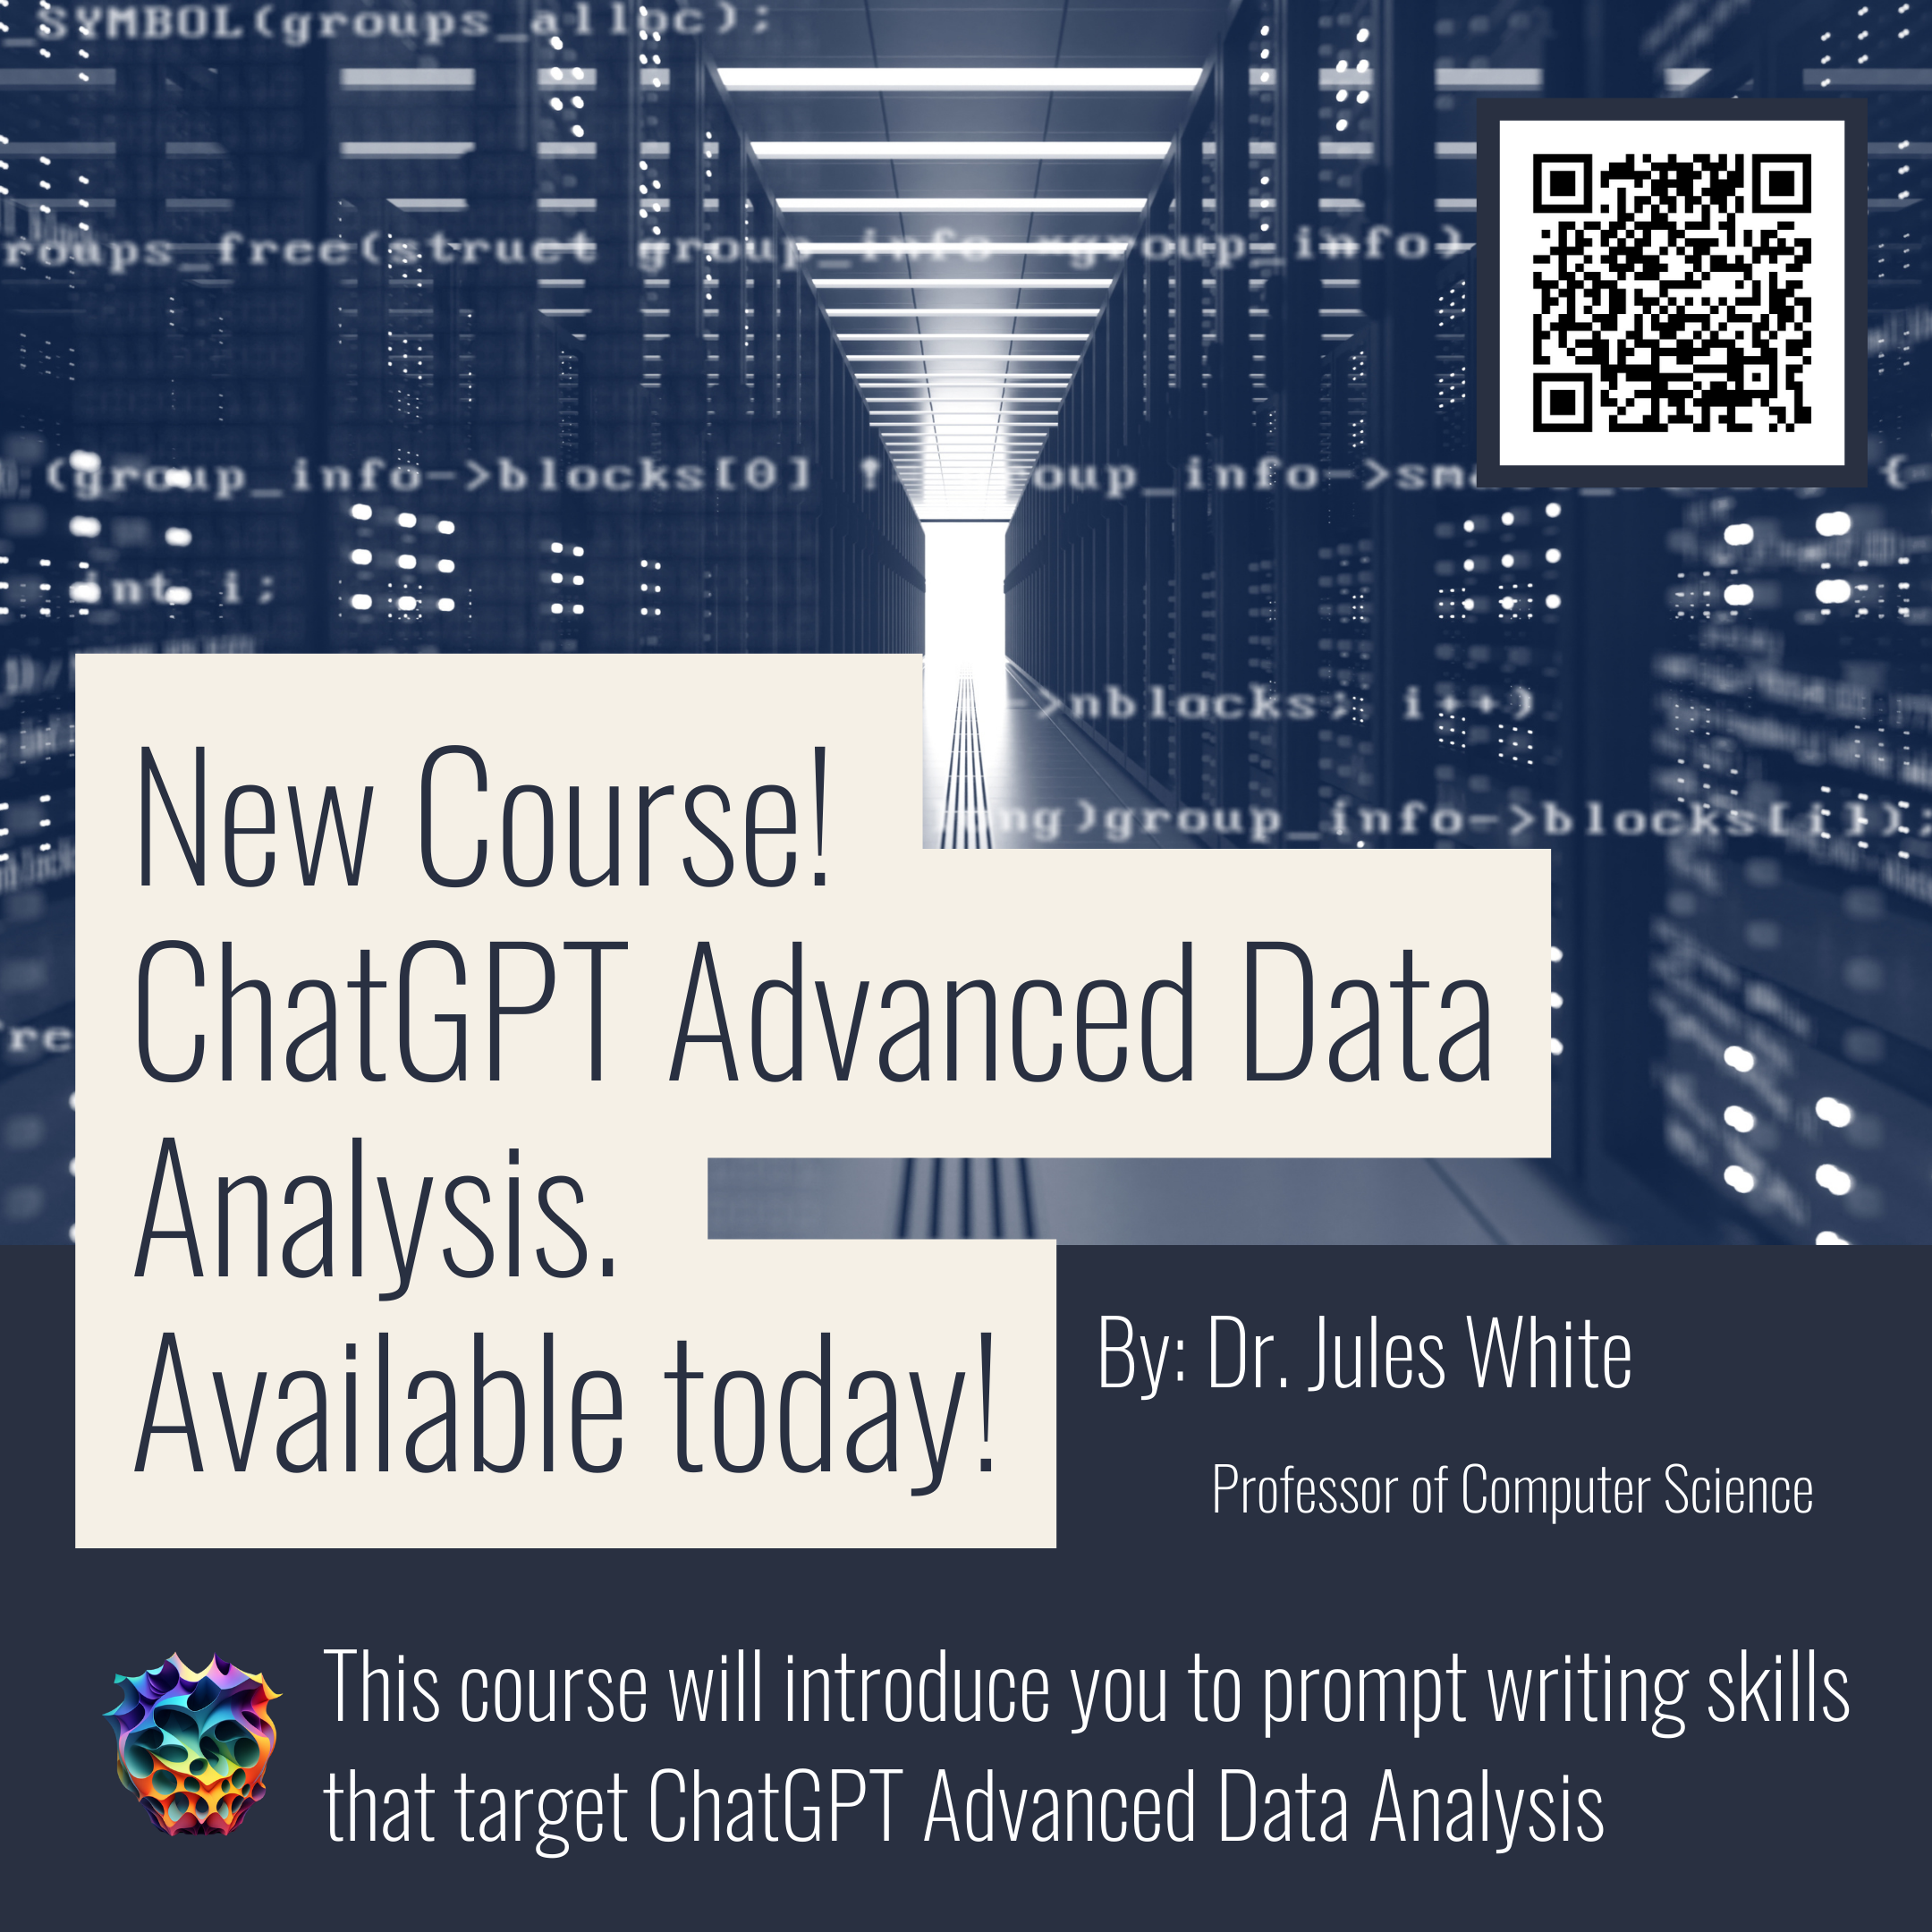 New, ChatGPT course from Professor Jules. Using ChatGPT for Advanced Data Analytics.